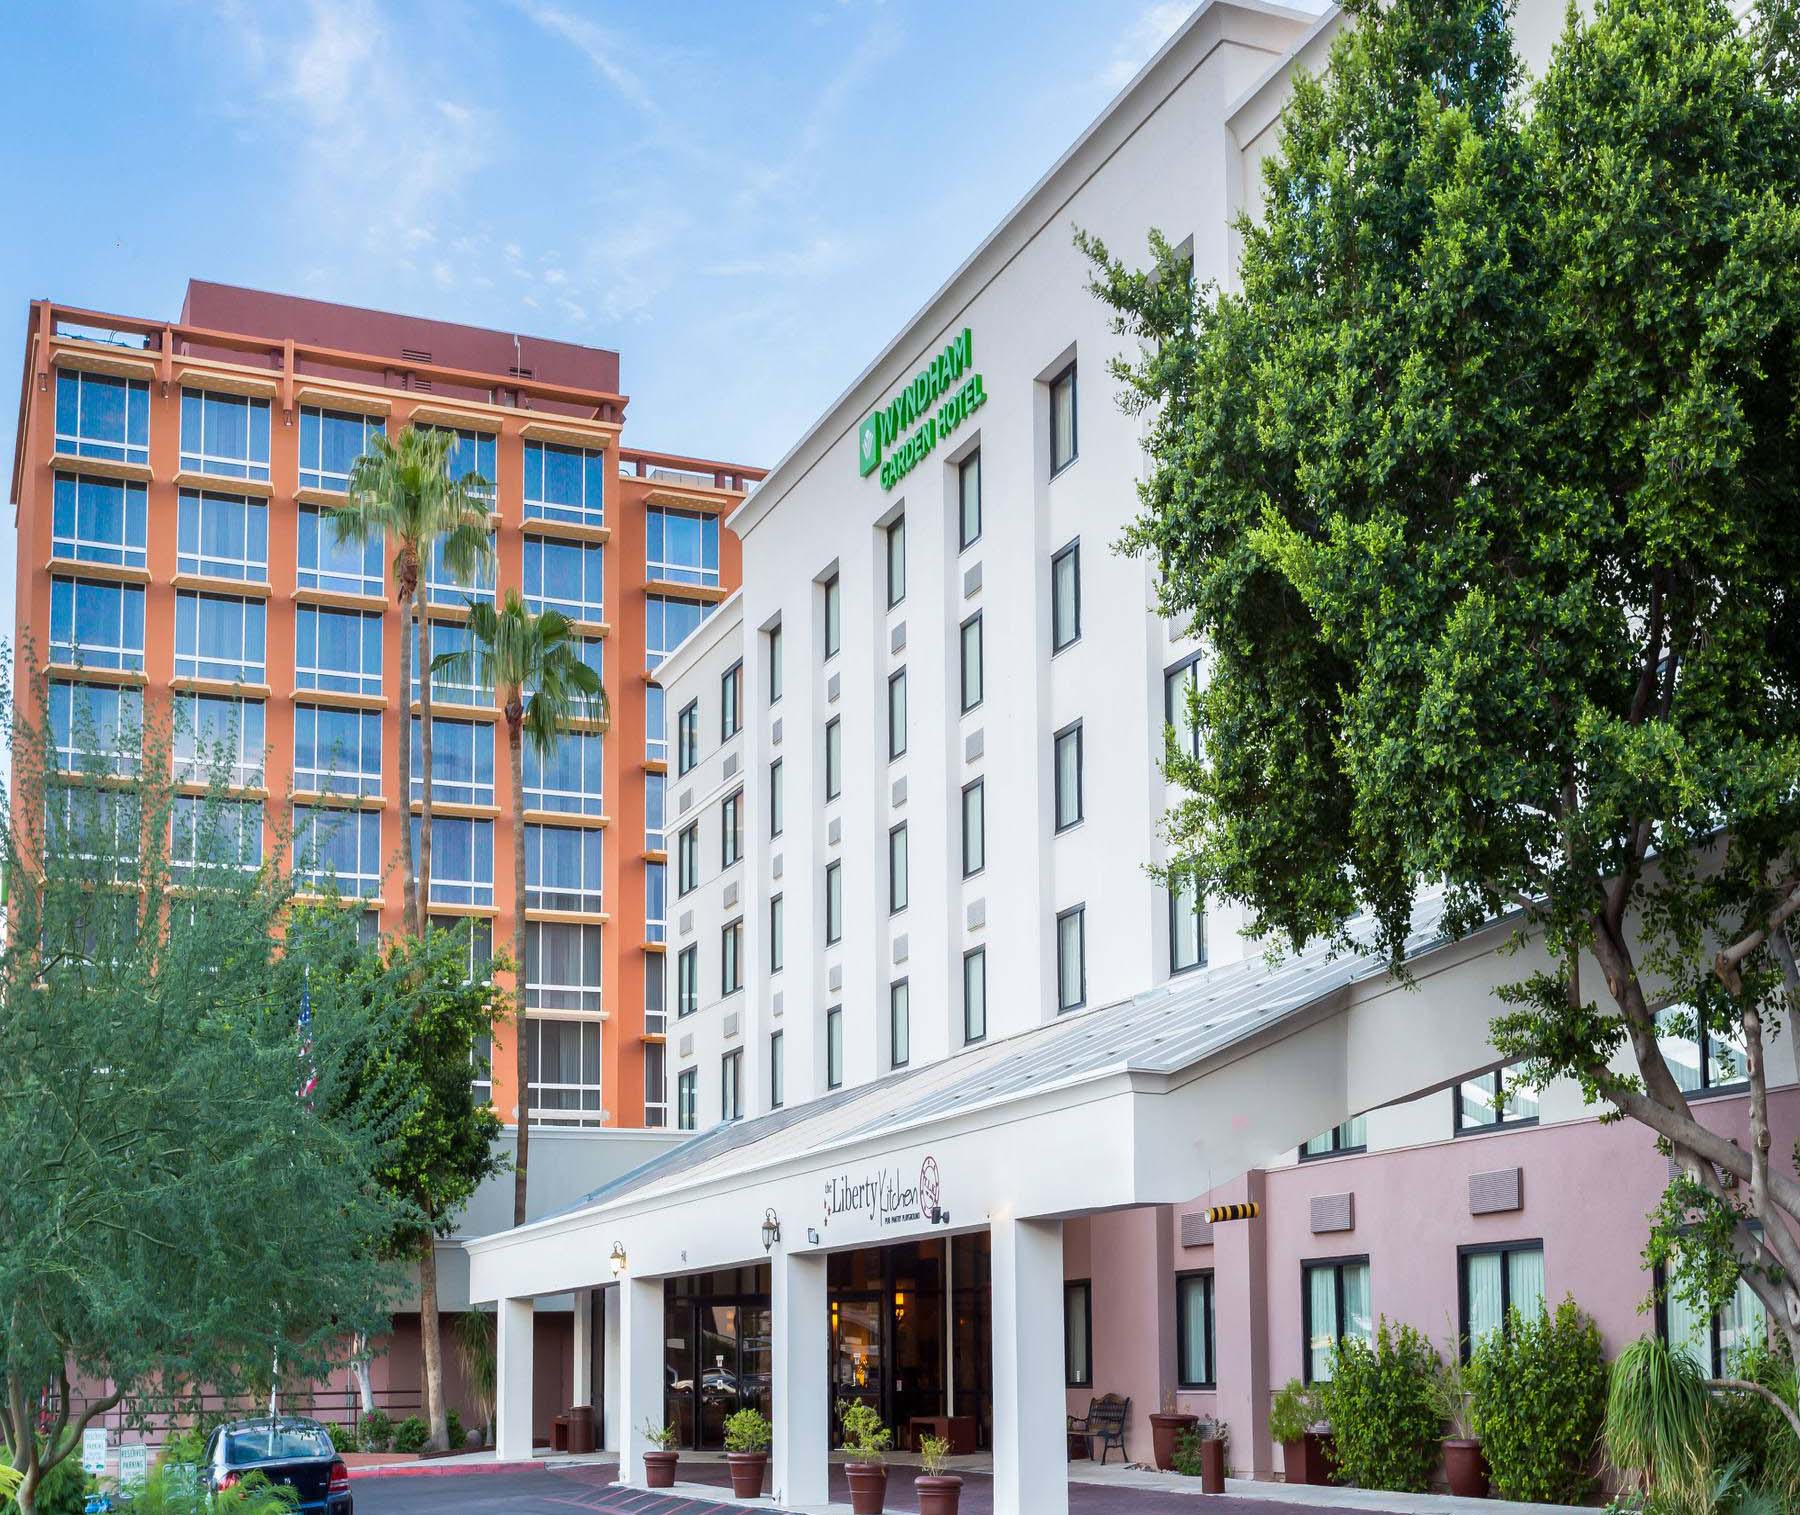 The Wyndham Garden Phoenix Midtown is Oxygen Hospitalitys second hotel acquisition following the purchase of the Ivy Palm R